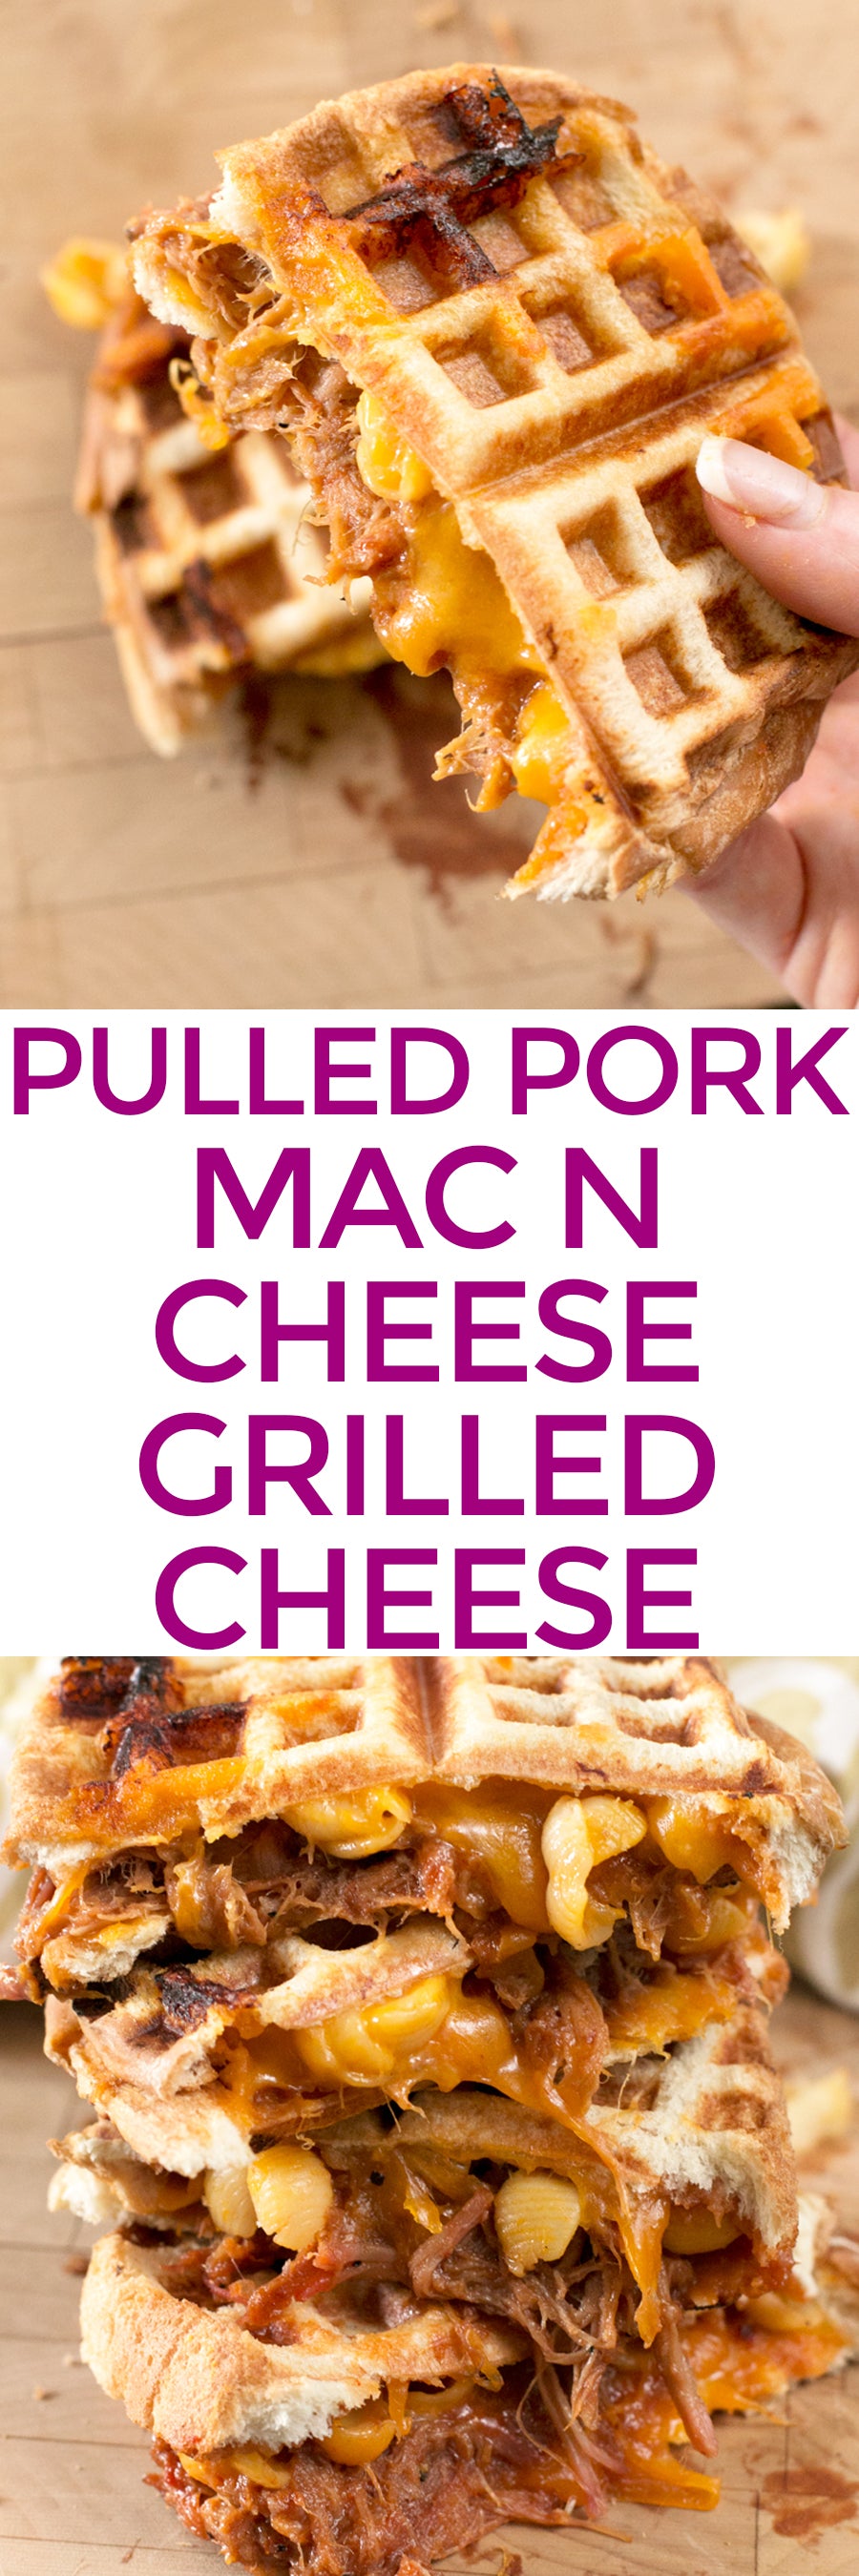 Pulled Pork Mac n Cheese Grilled Cheese Sandwiches (in a waffle iron ...